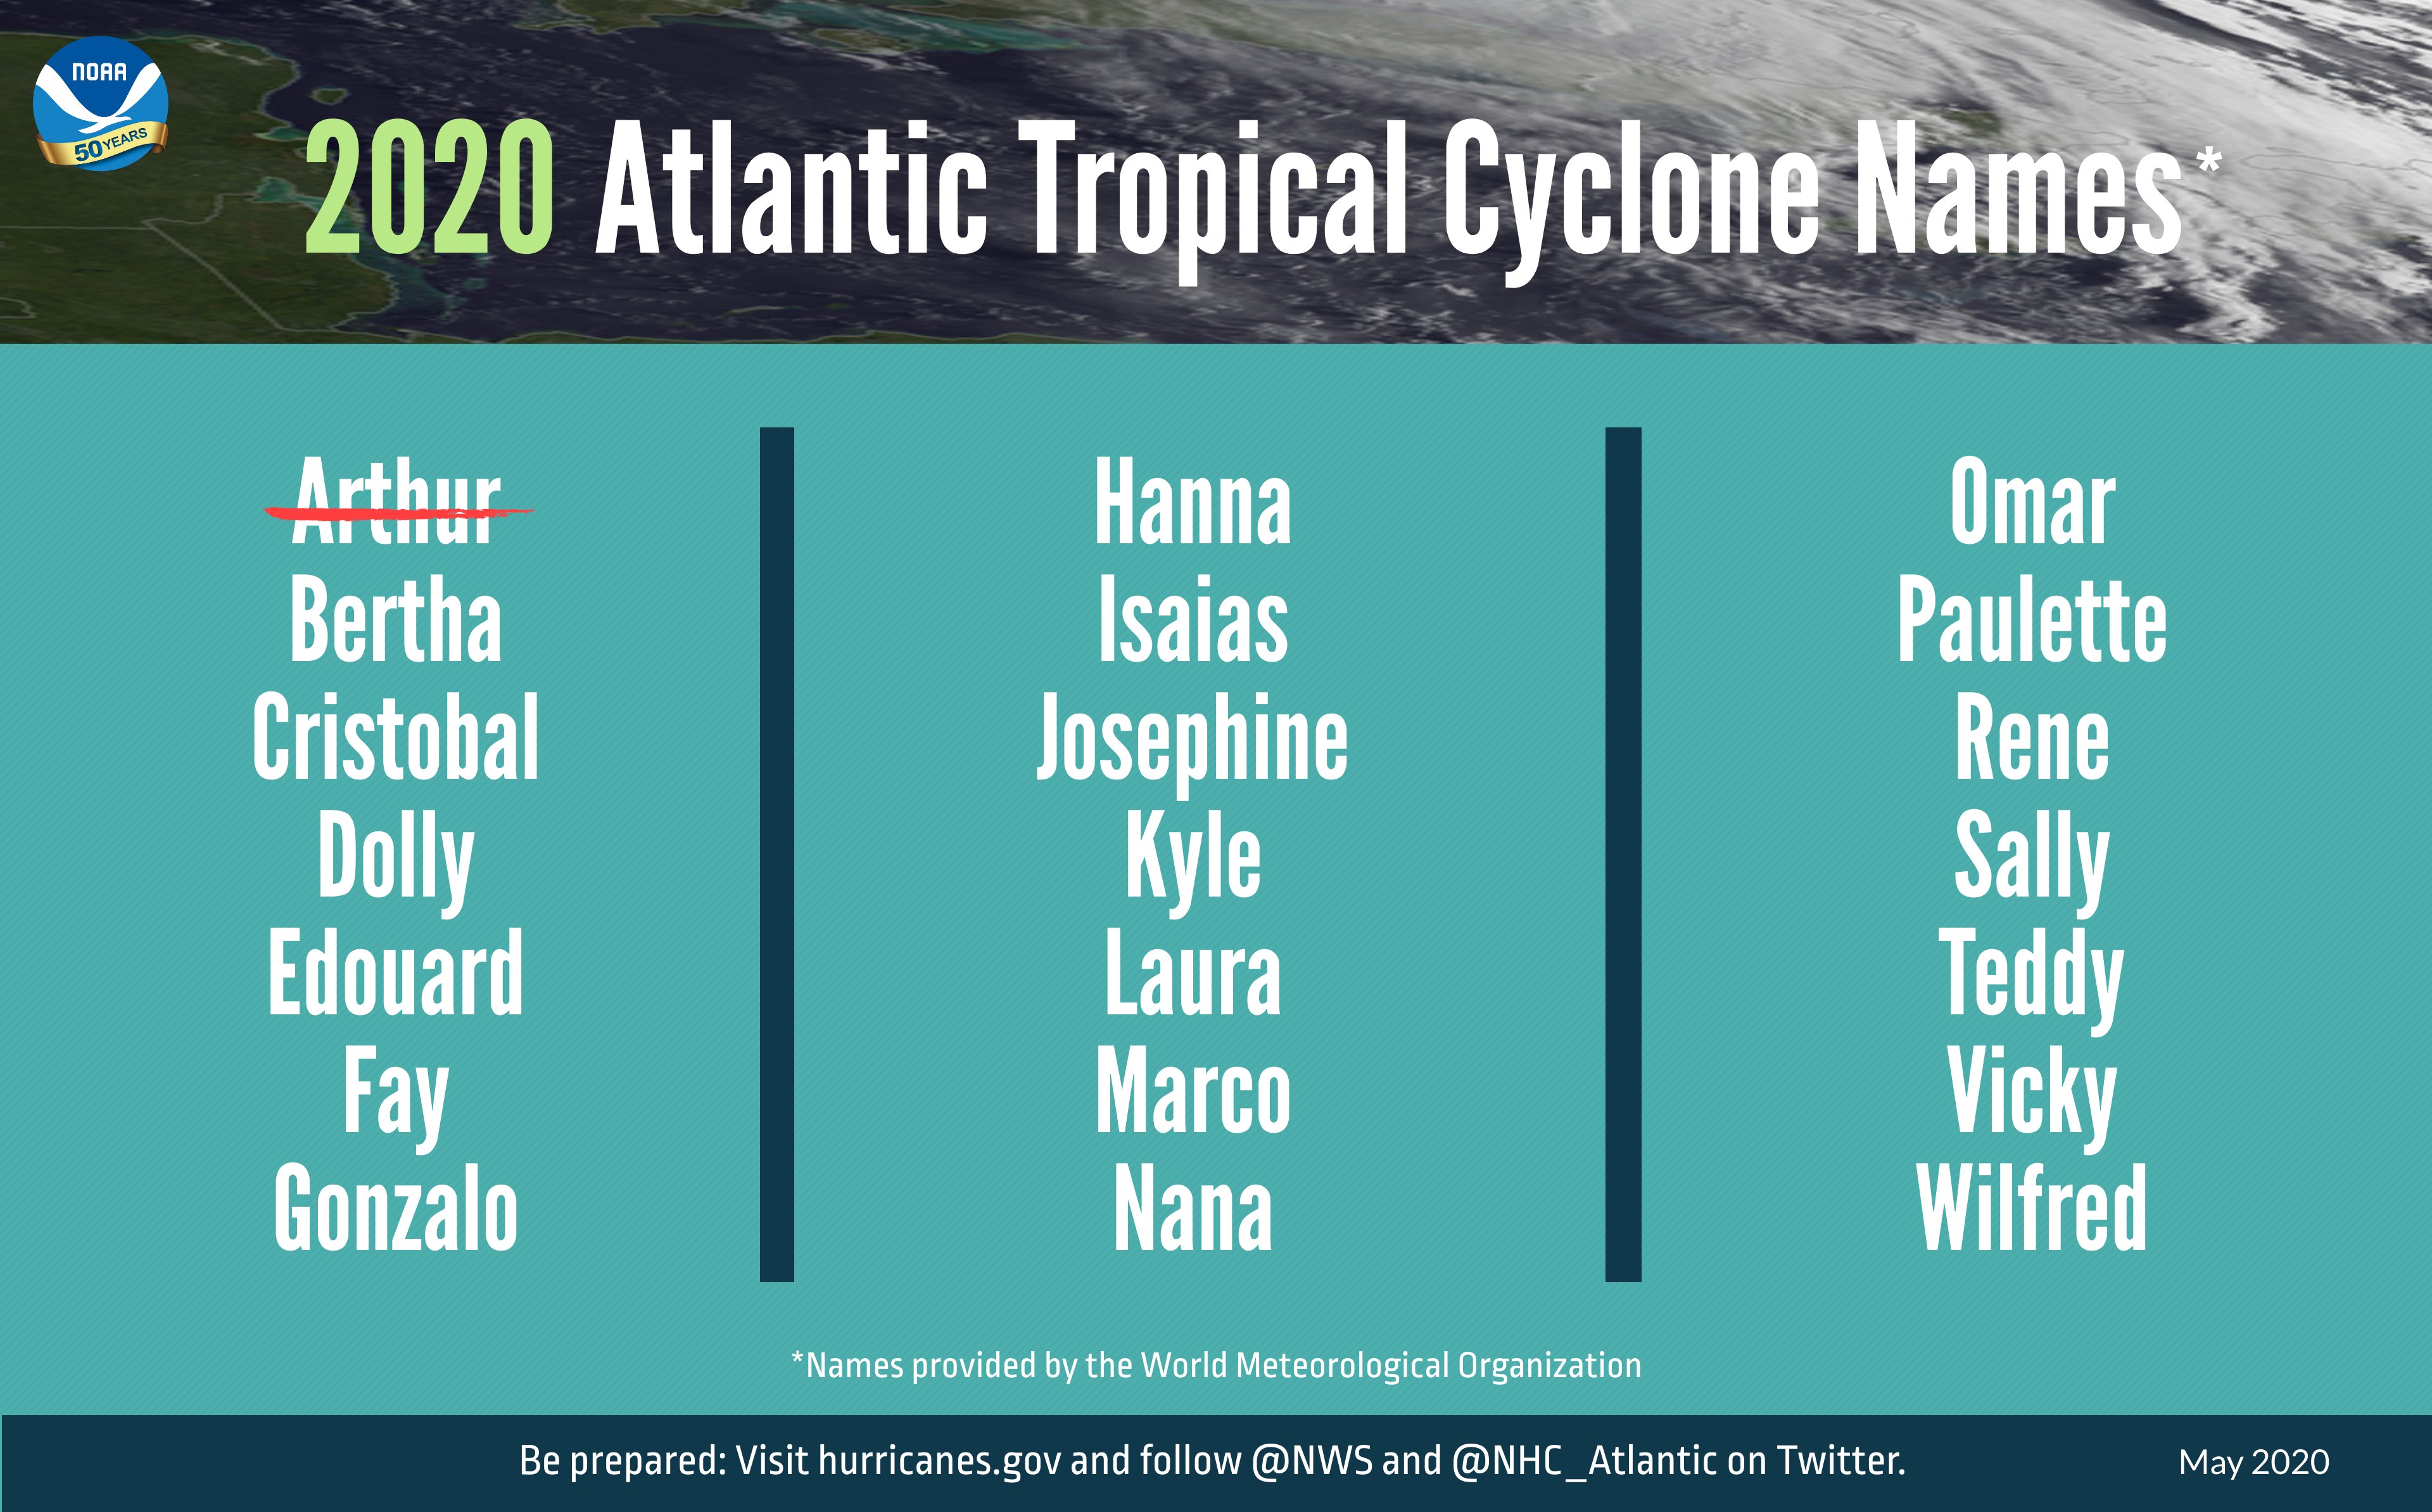 A summary graphic showing an alphabetical list of the 2020 Atlantic tropical cyclone names as selected by the World Meteorological Organization. The first named storm of the season, Arthur, occurred in earlier in May before the NOAA's outlook was announced. The official start of the Atlantic hurricane season is June 1 and runs through November 30.